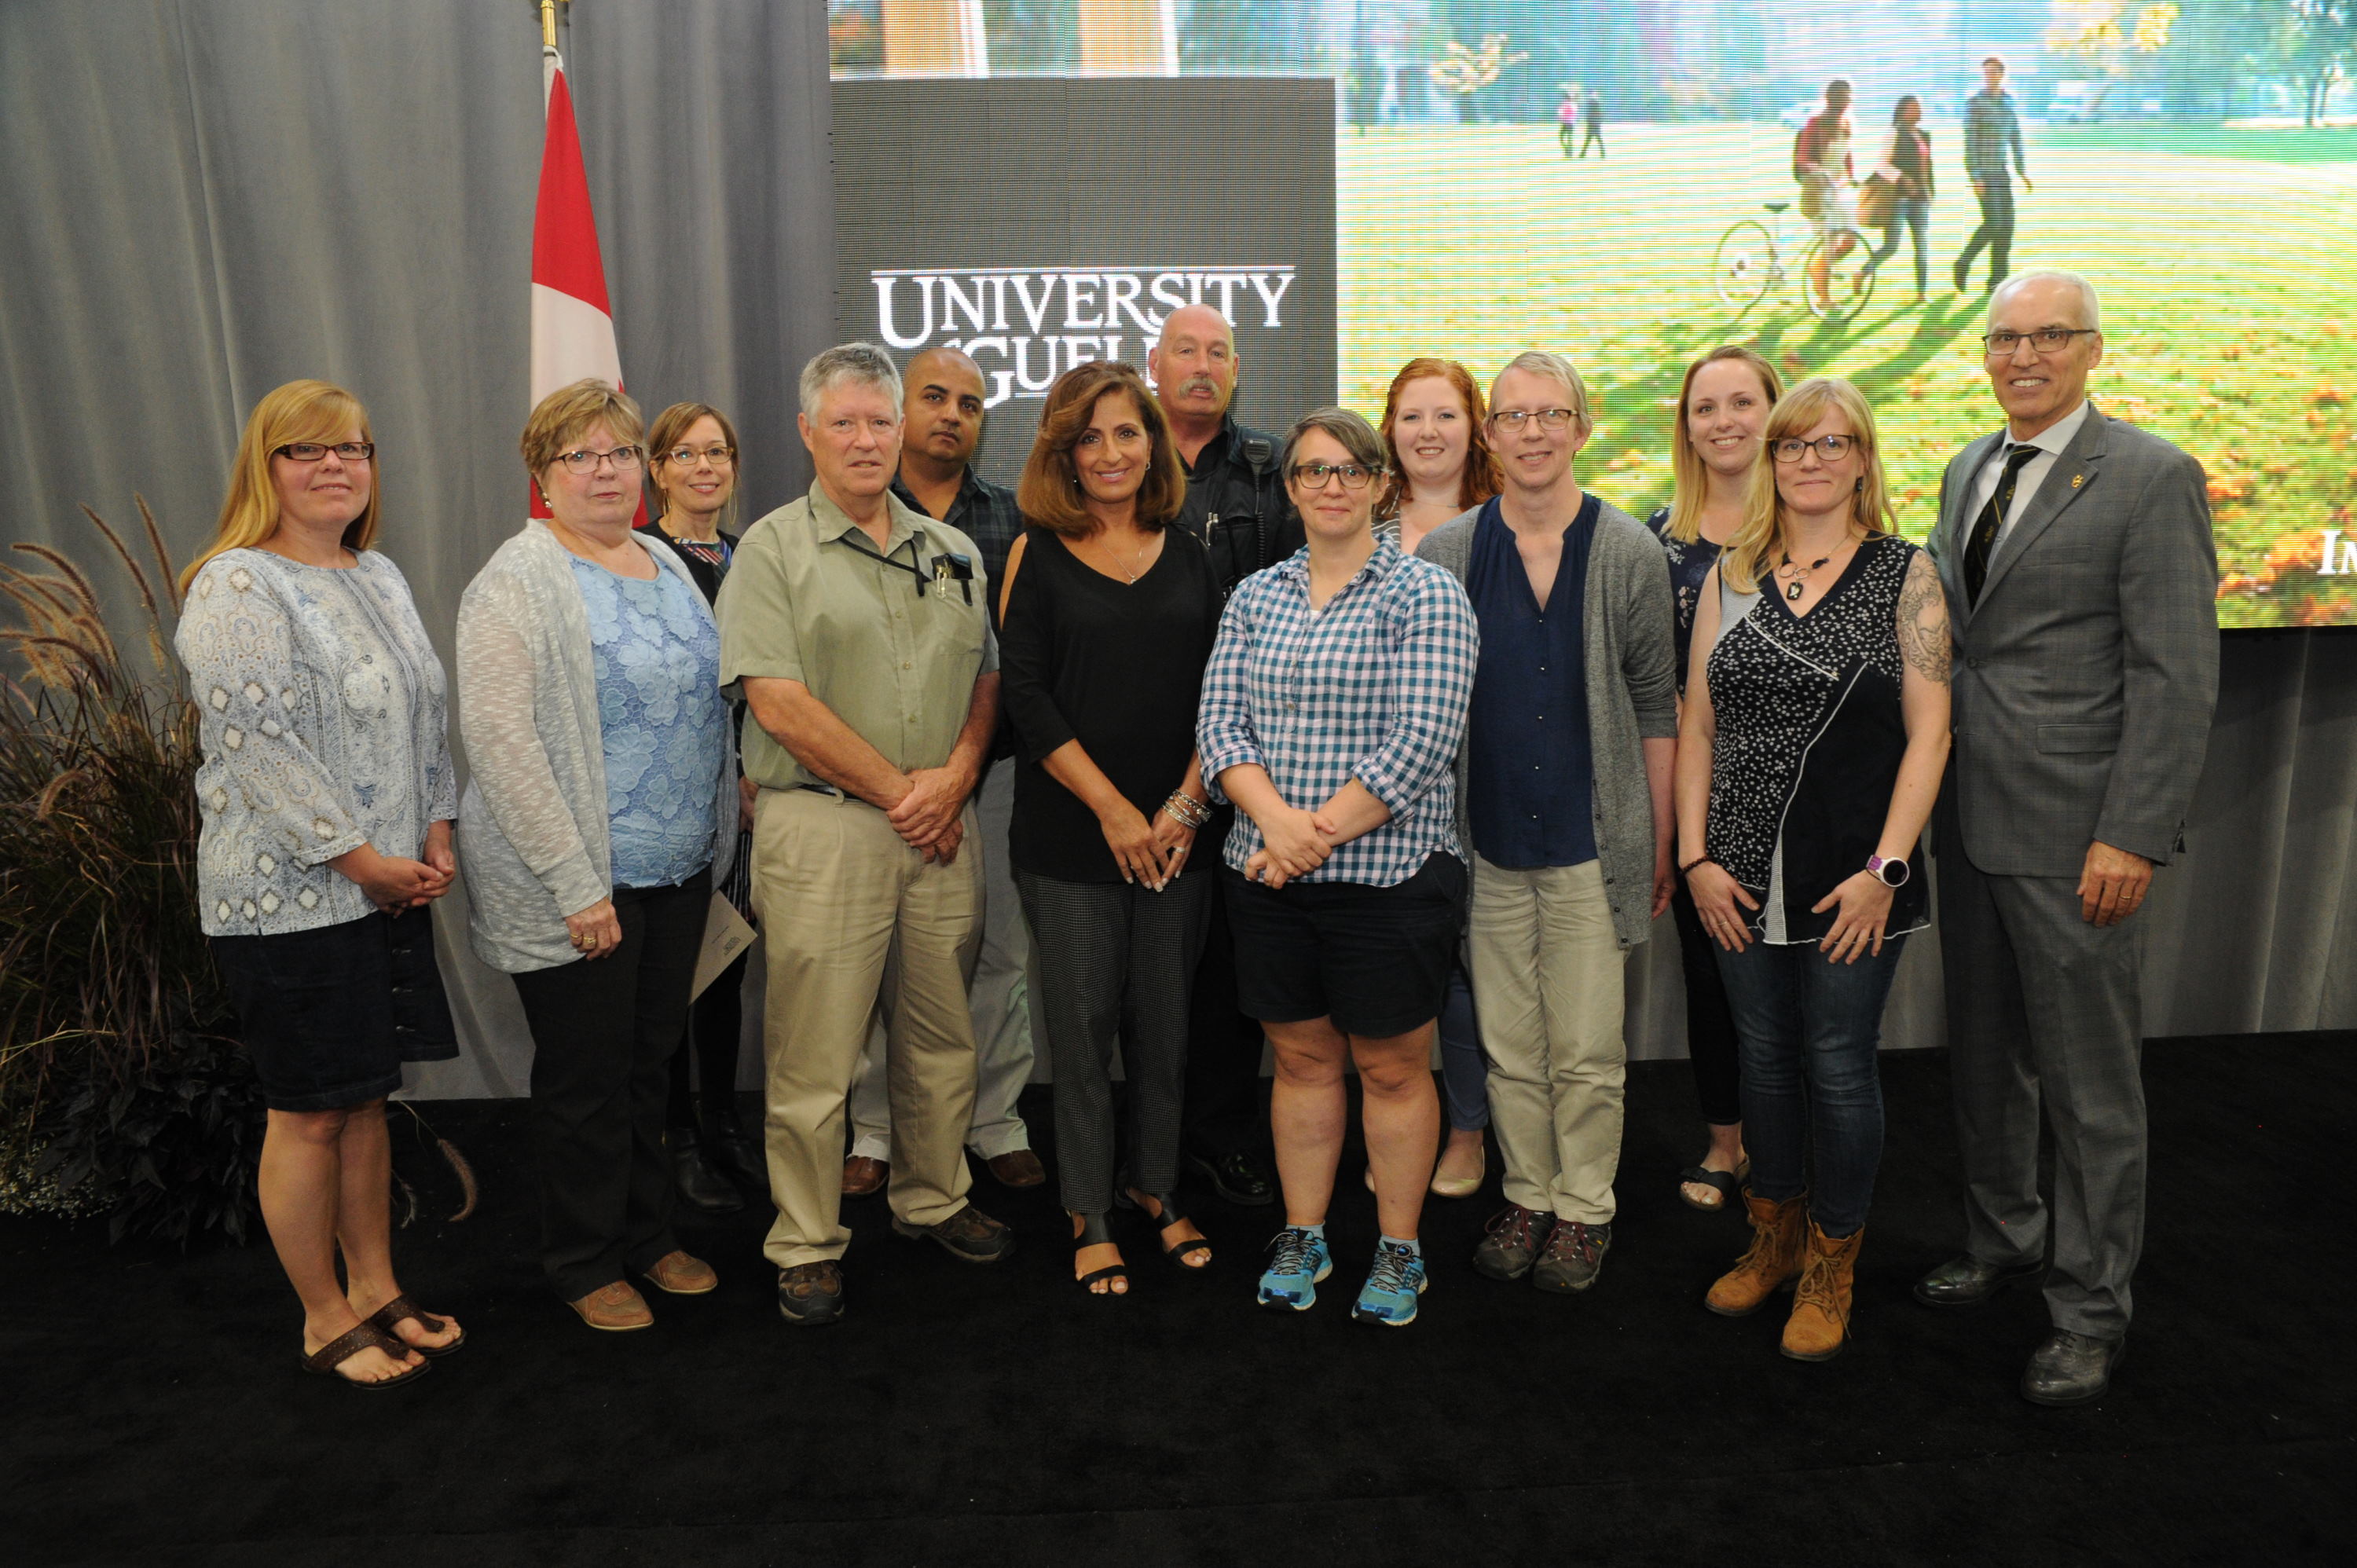 U of G Recognizes Staff, Faculty at Community Breakfast